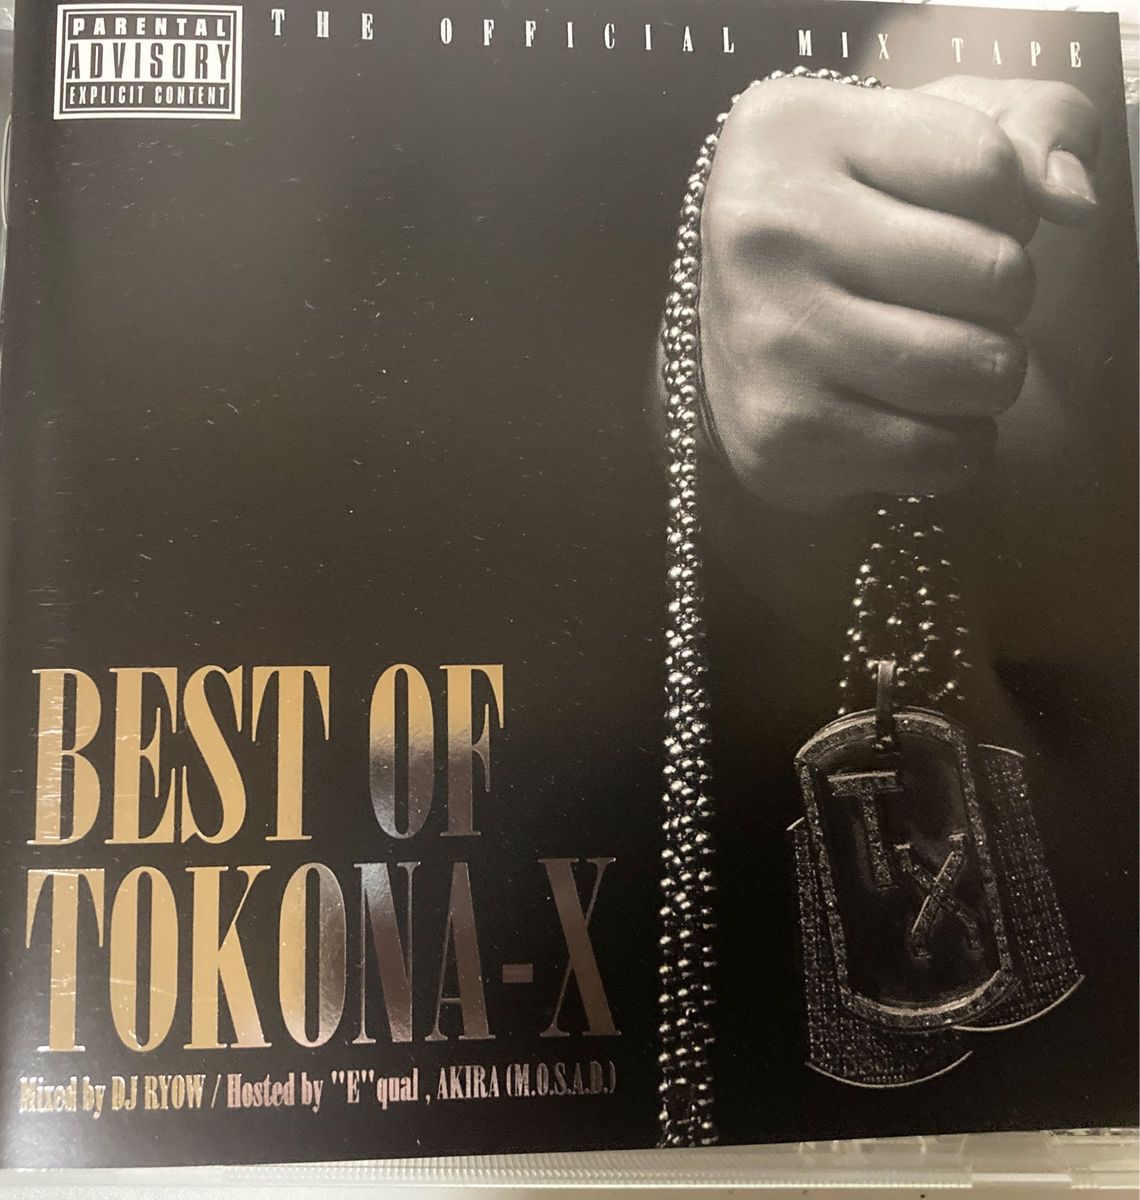 BEST OF TOKONA-X Mixed by DJ RYOW/Hosted by M.O.S.A.D.)